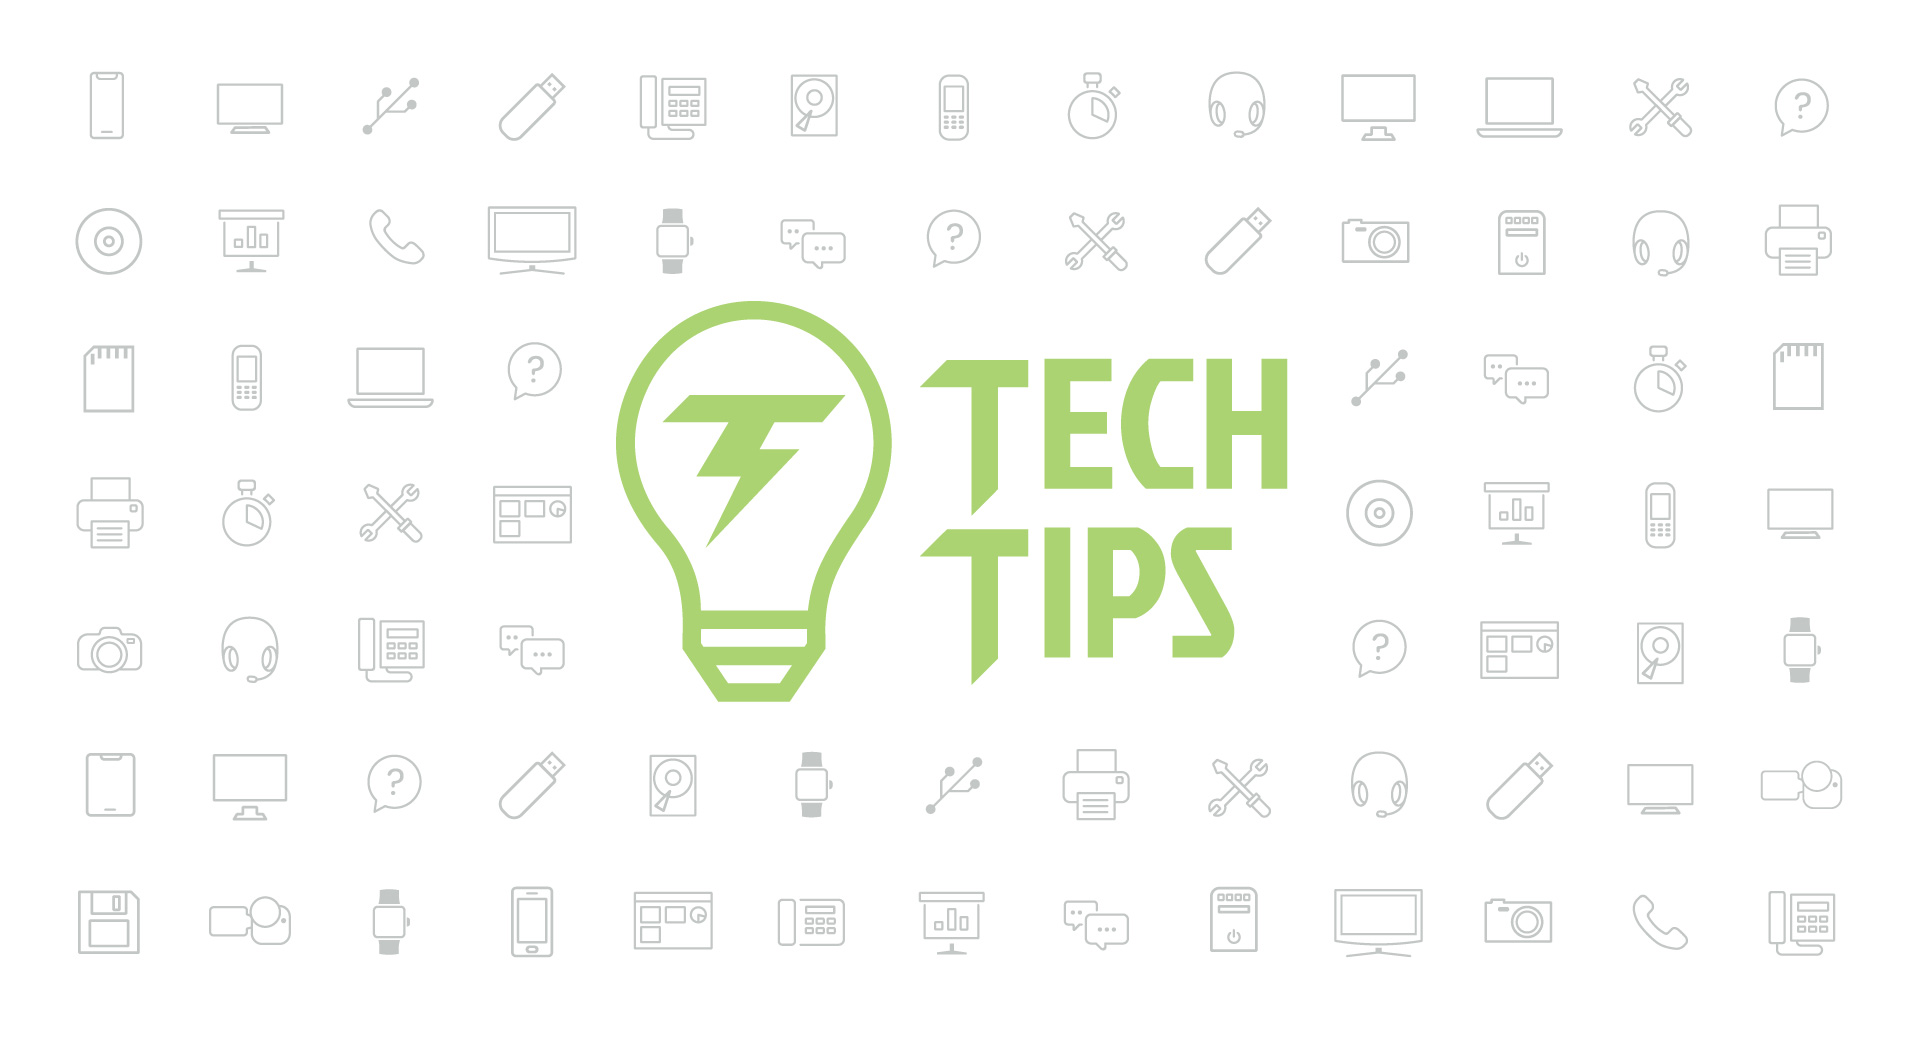 Technology Tips: October 2016 Edition